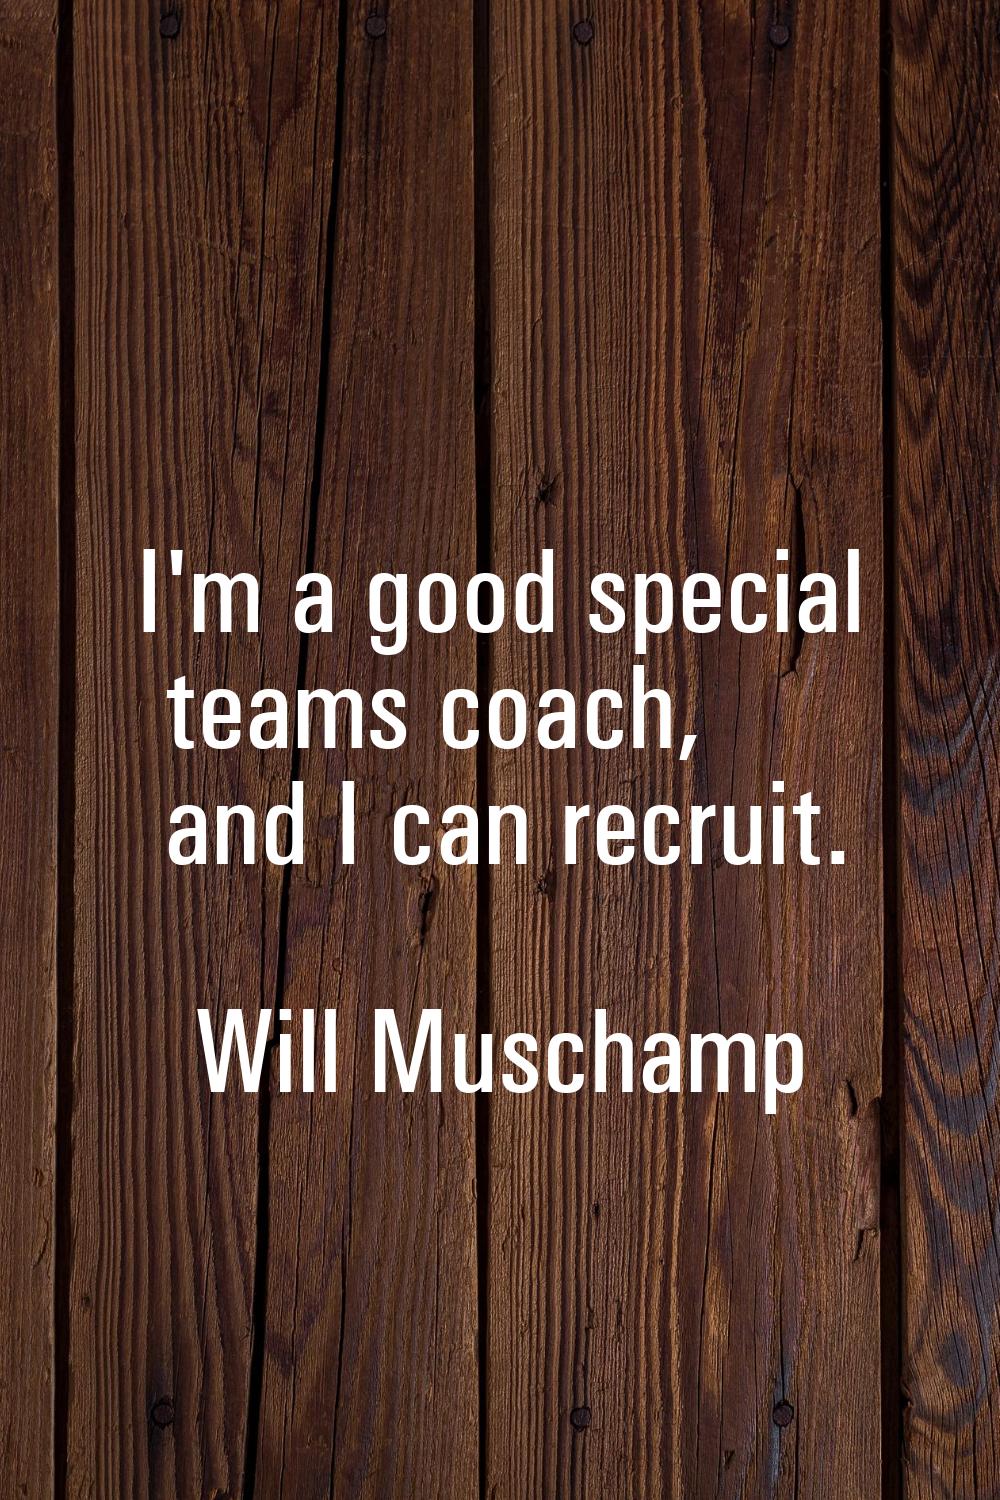 I'm a good special teams coach, and I can recruit.